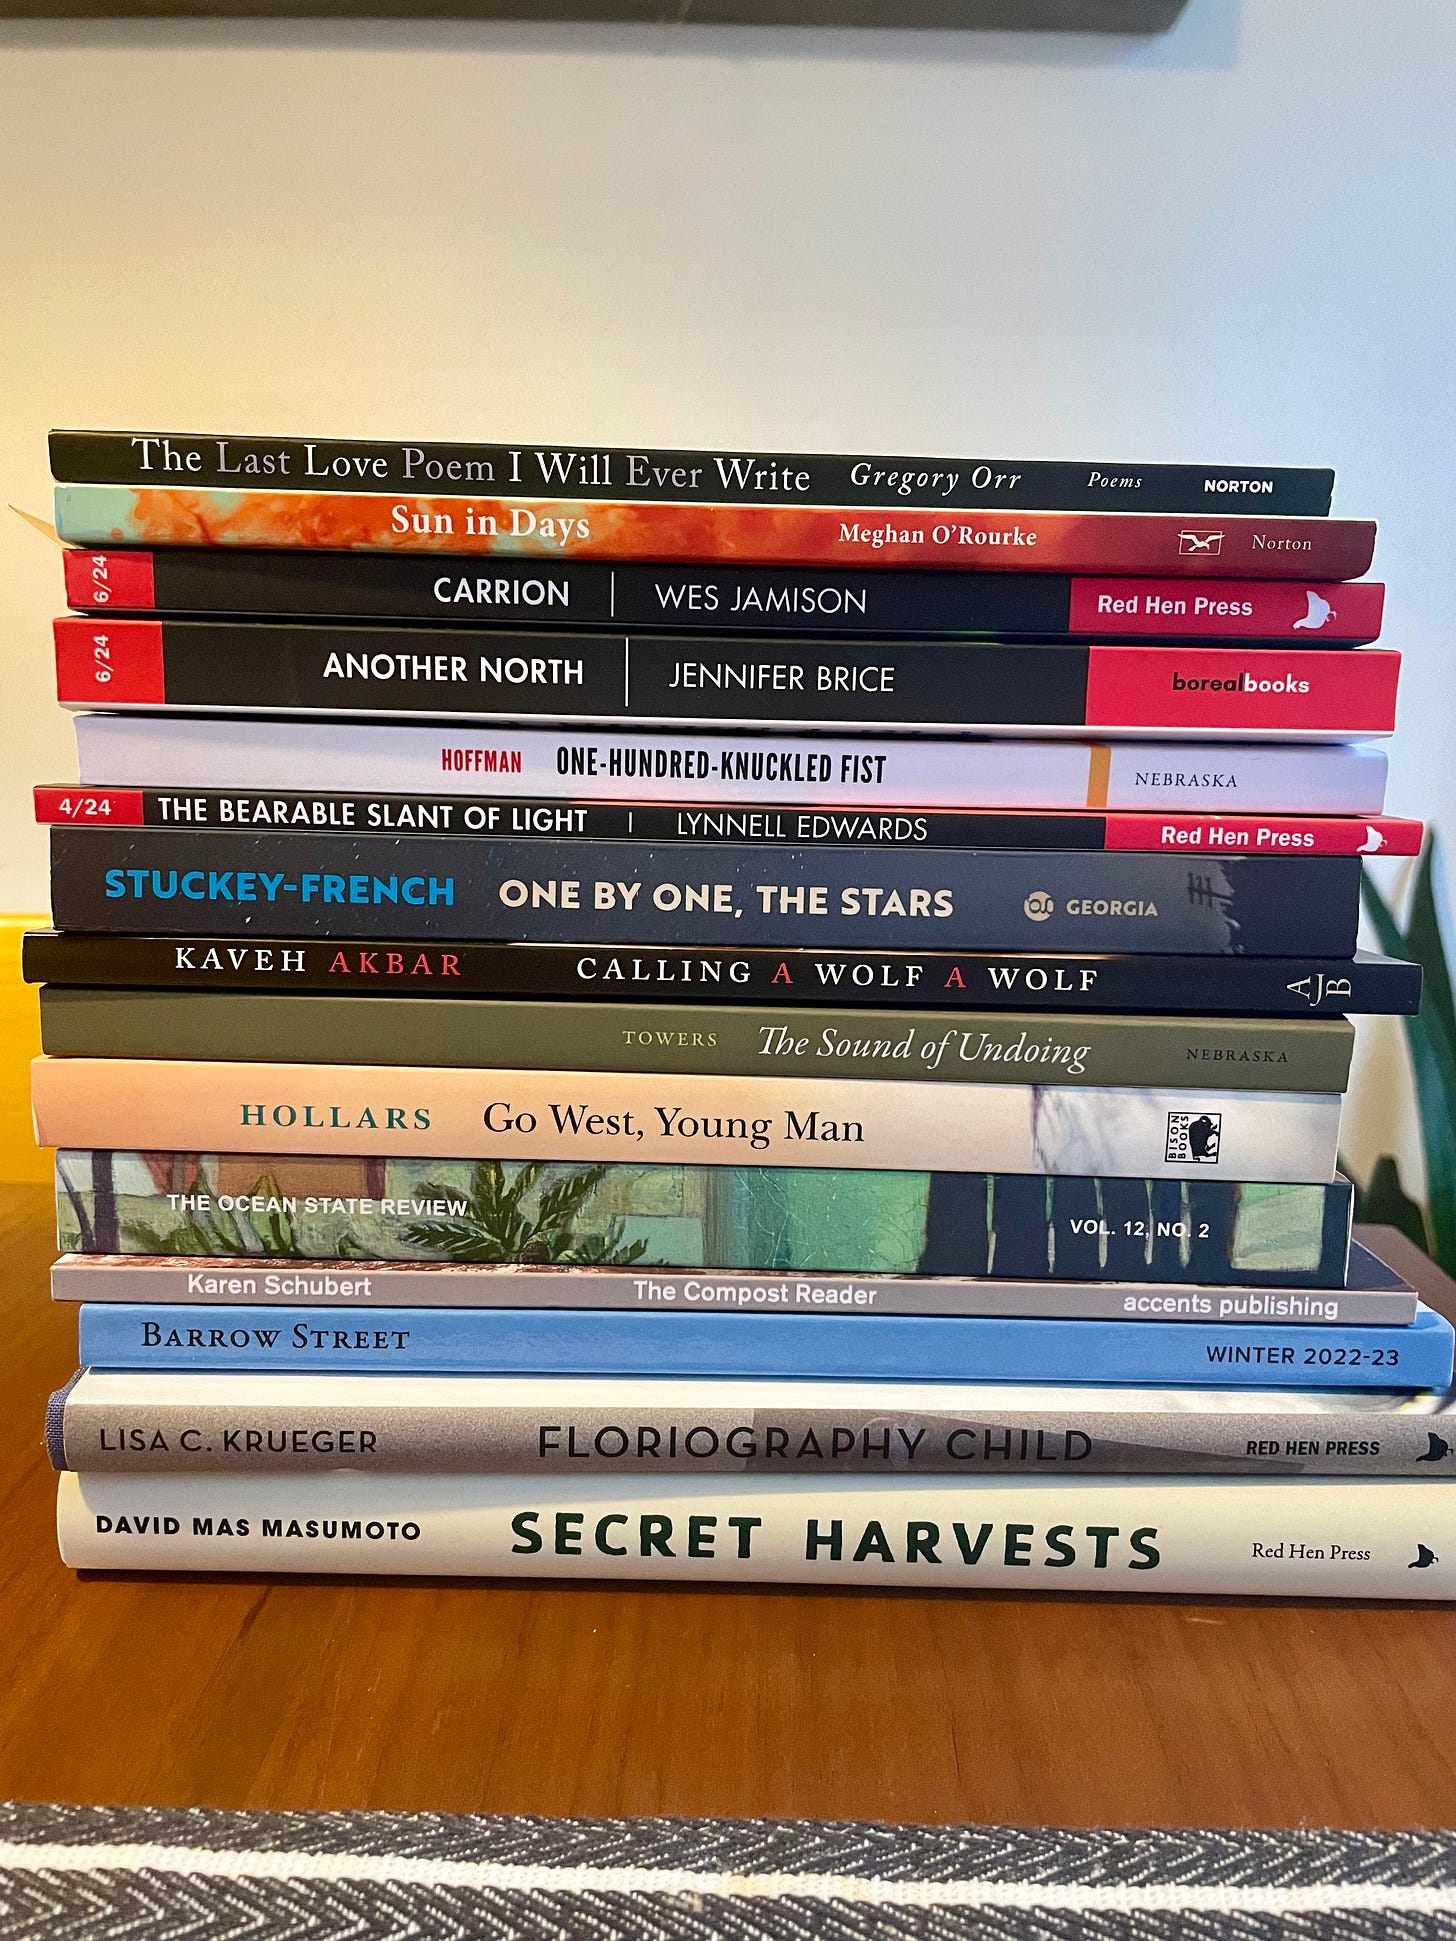 A stack of 15 books with the spines showing. The books include Gregory Orr's The Last Love Poem I Will Ever Write and Kaveh Akbar's Calling a Wolf a Wolf.